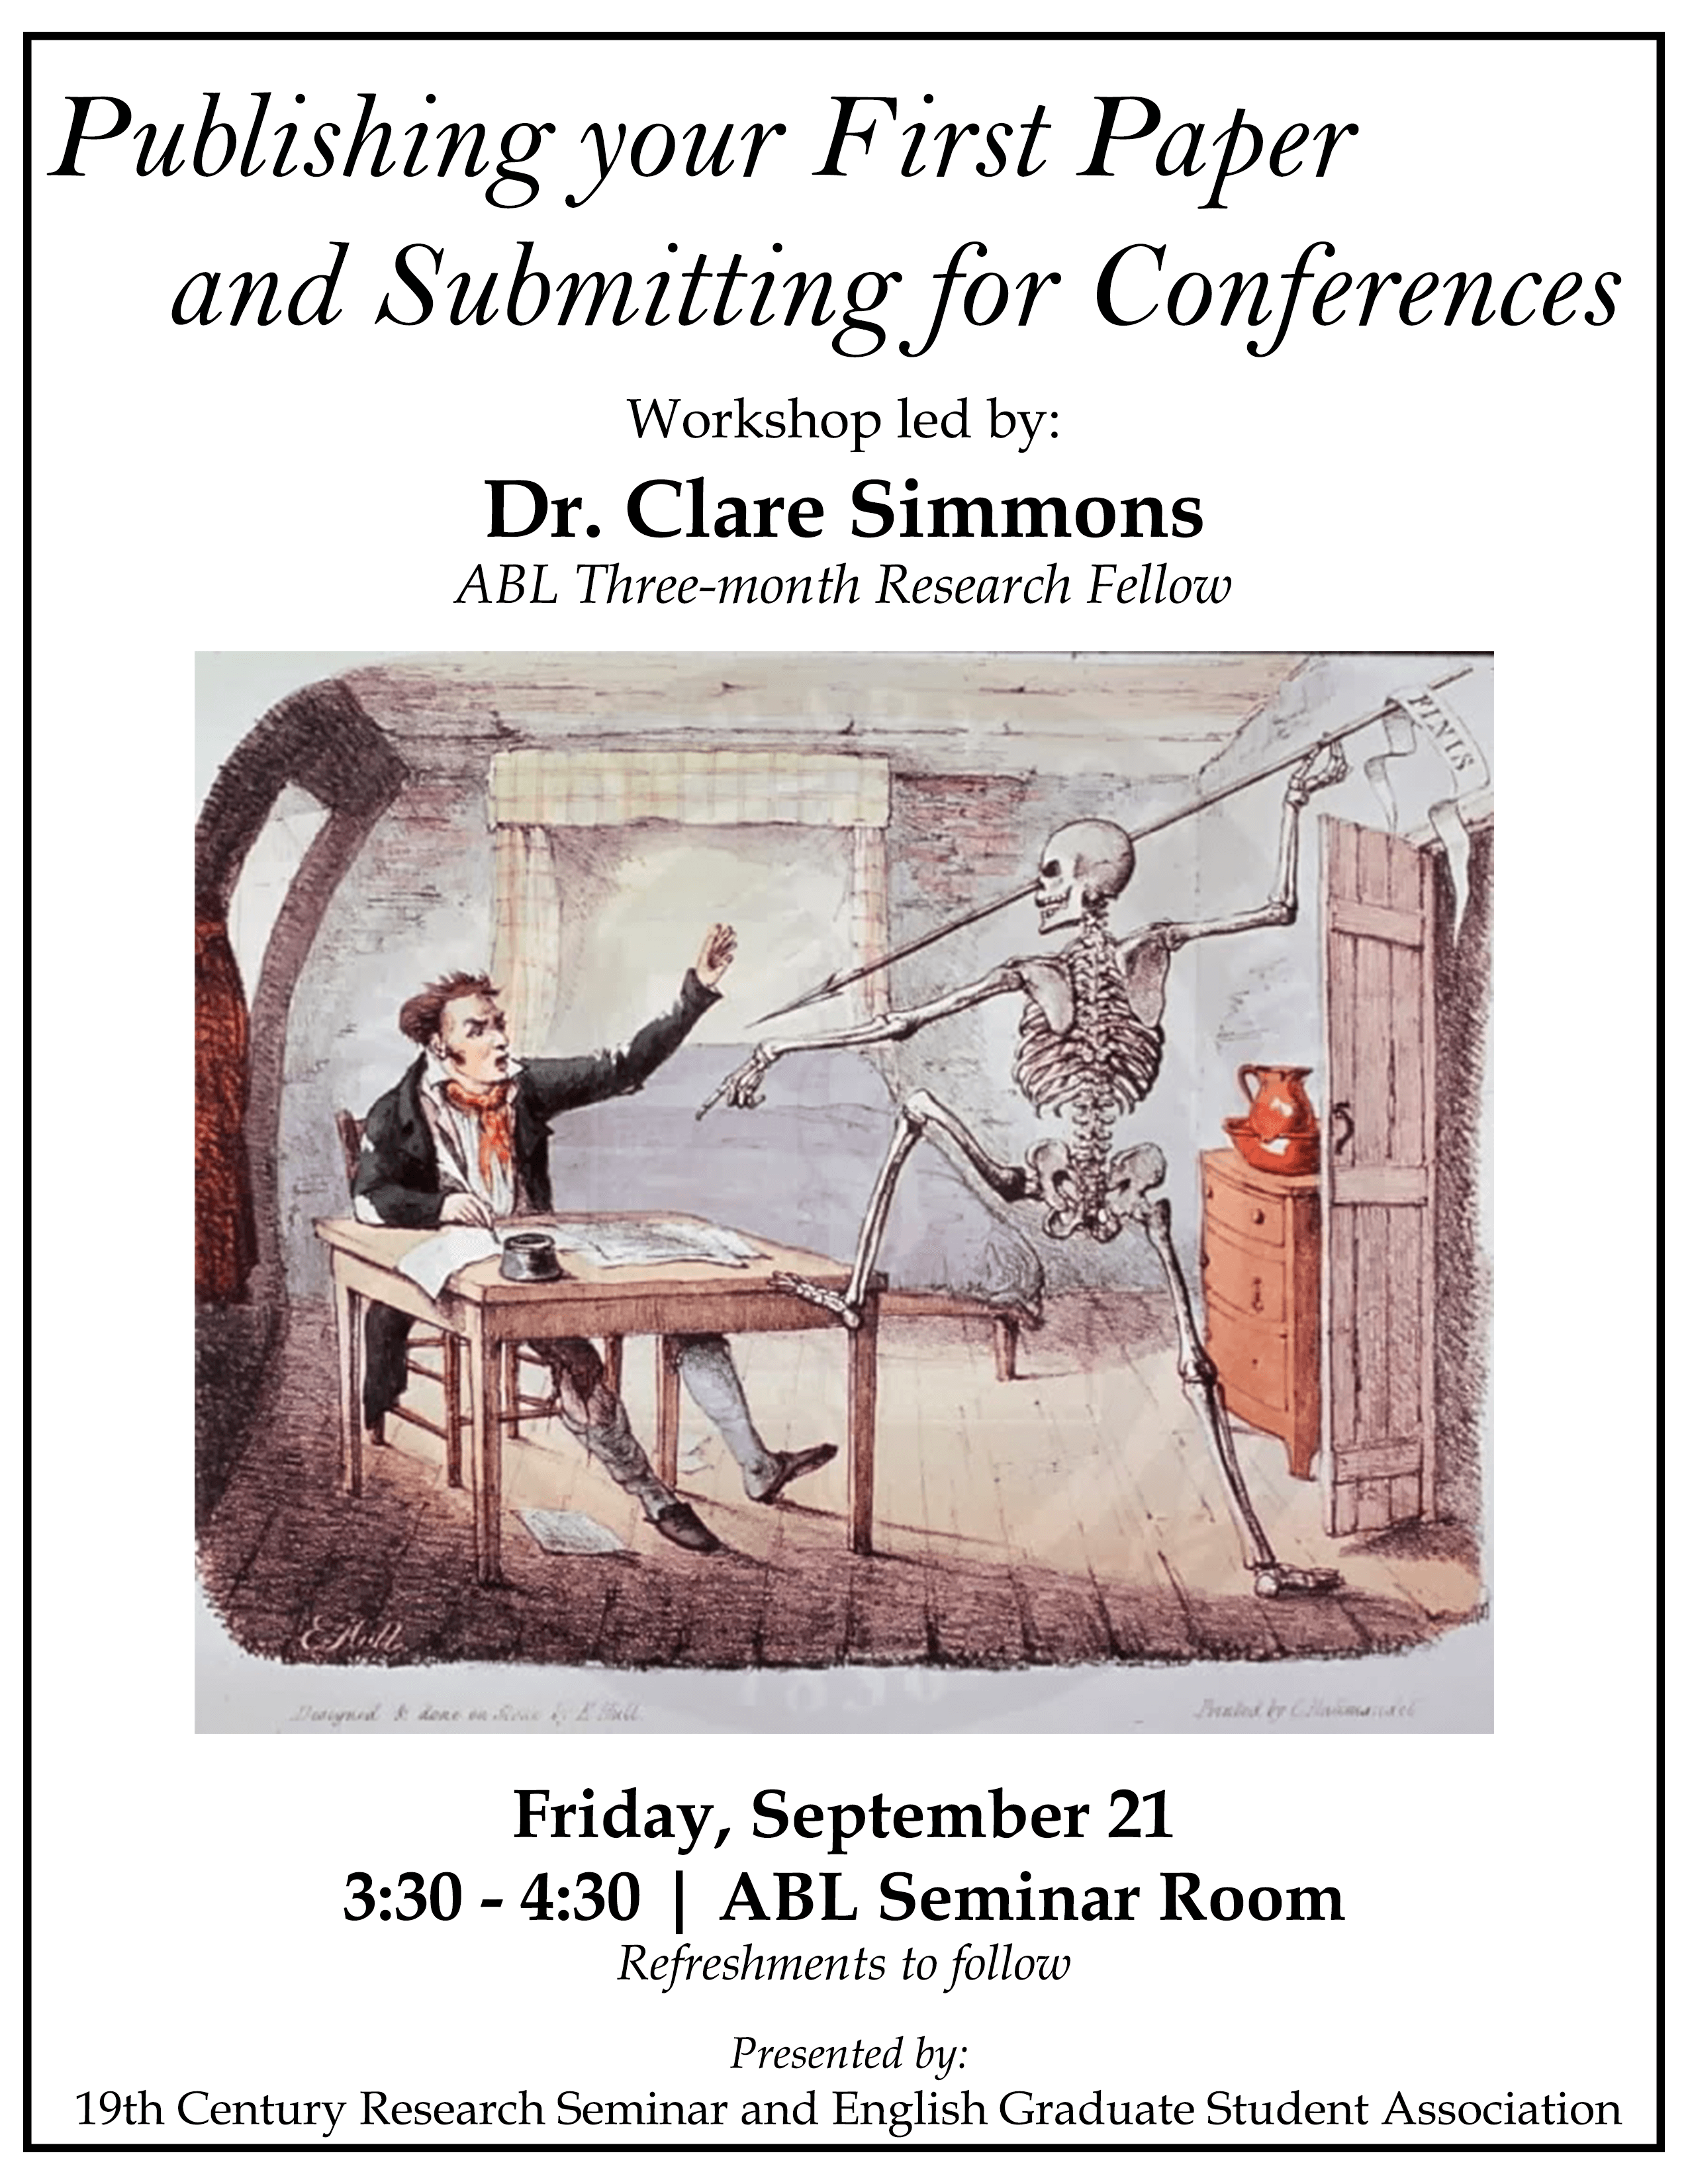 Flyer for the Workshop led by Prof. Clare Simmons